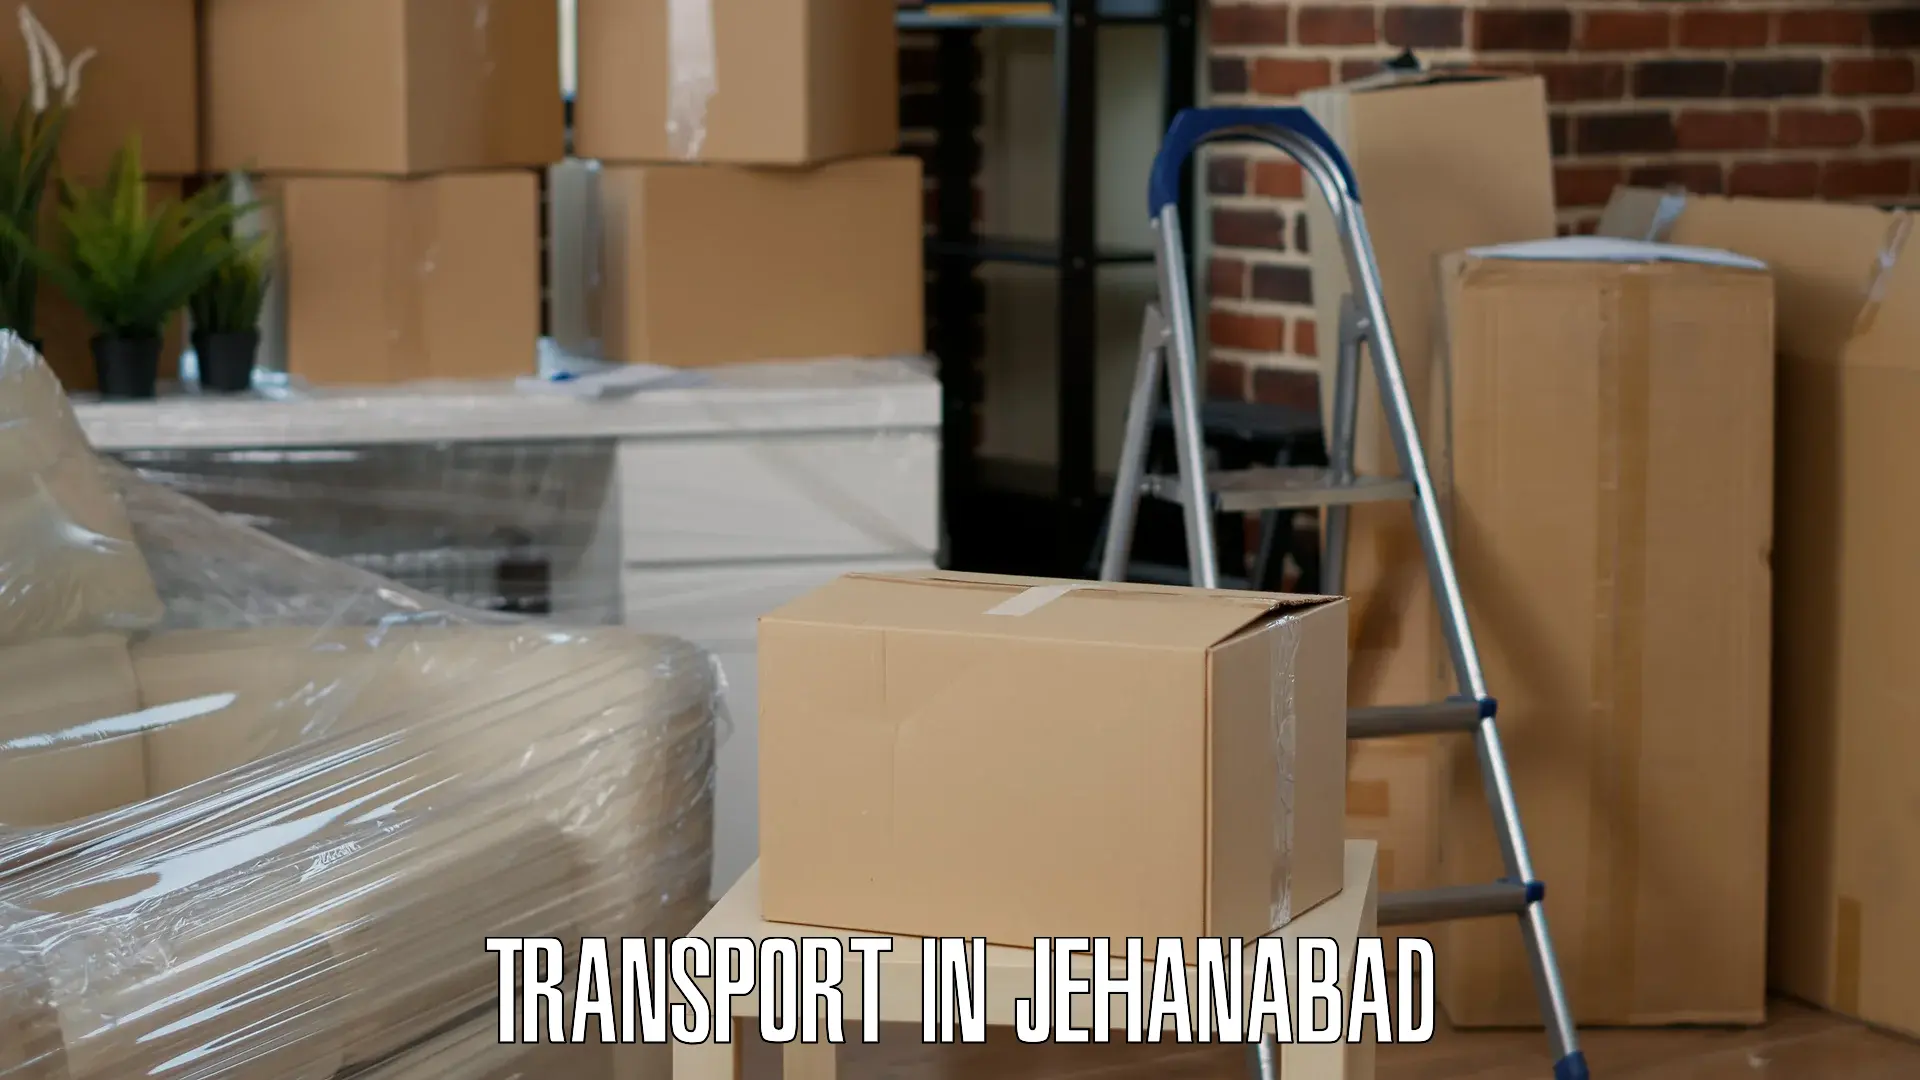 Cargo transportation services in Jehanabad